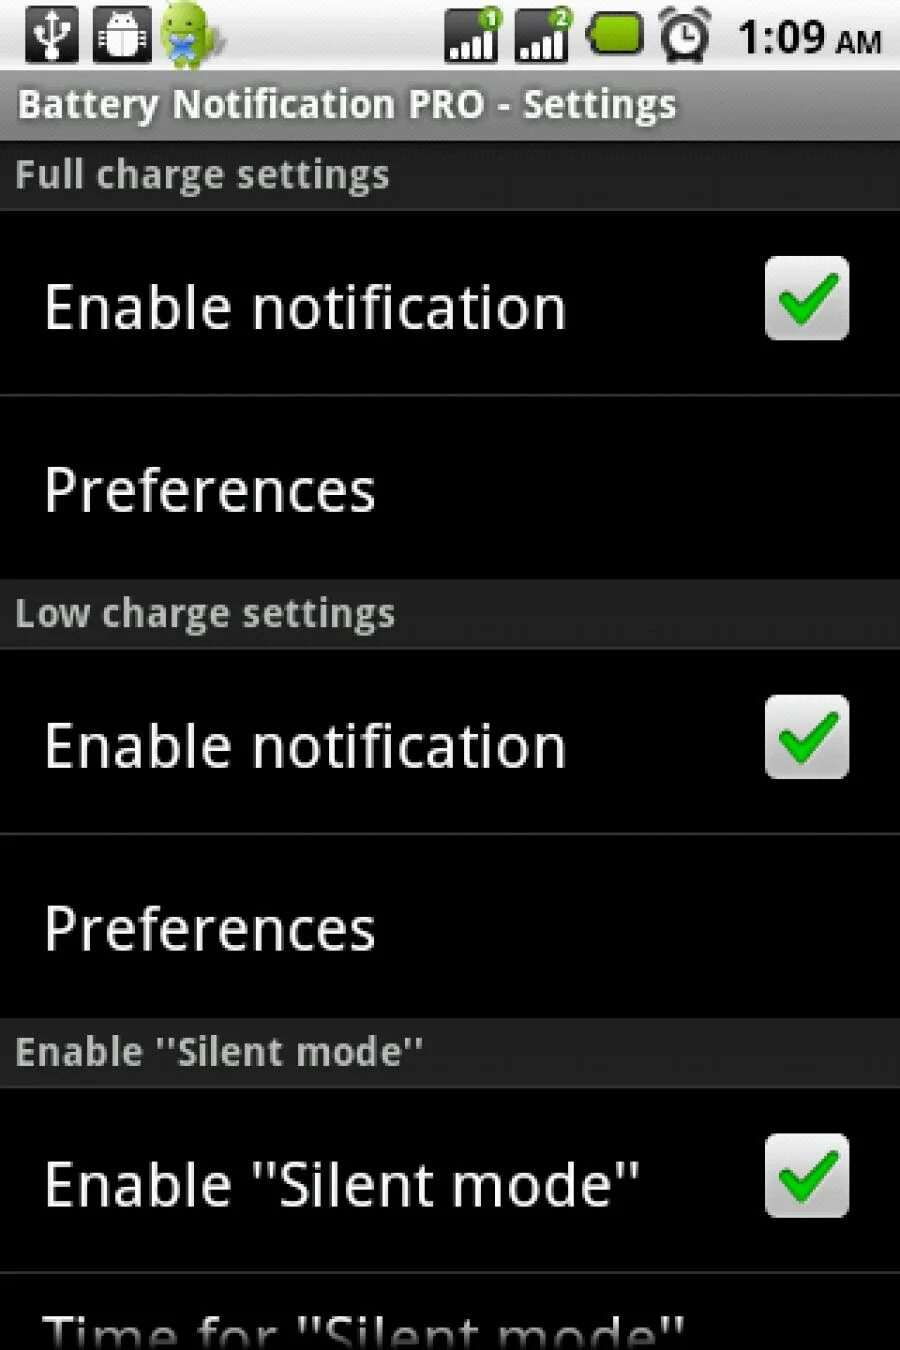 Battery notification. Battery Notification APK.. Battery Notification Push. Battery Mode. Battery Low Charging Samsung Android 4.4.